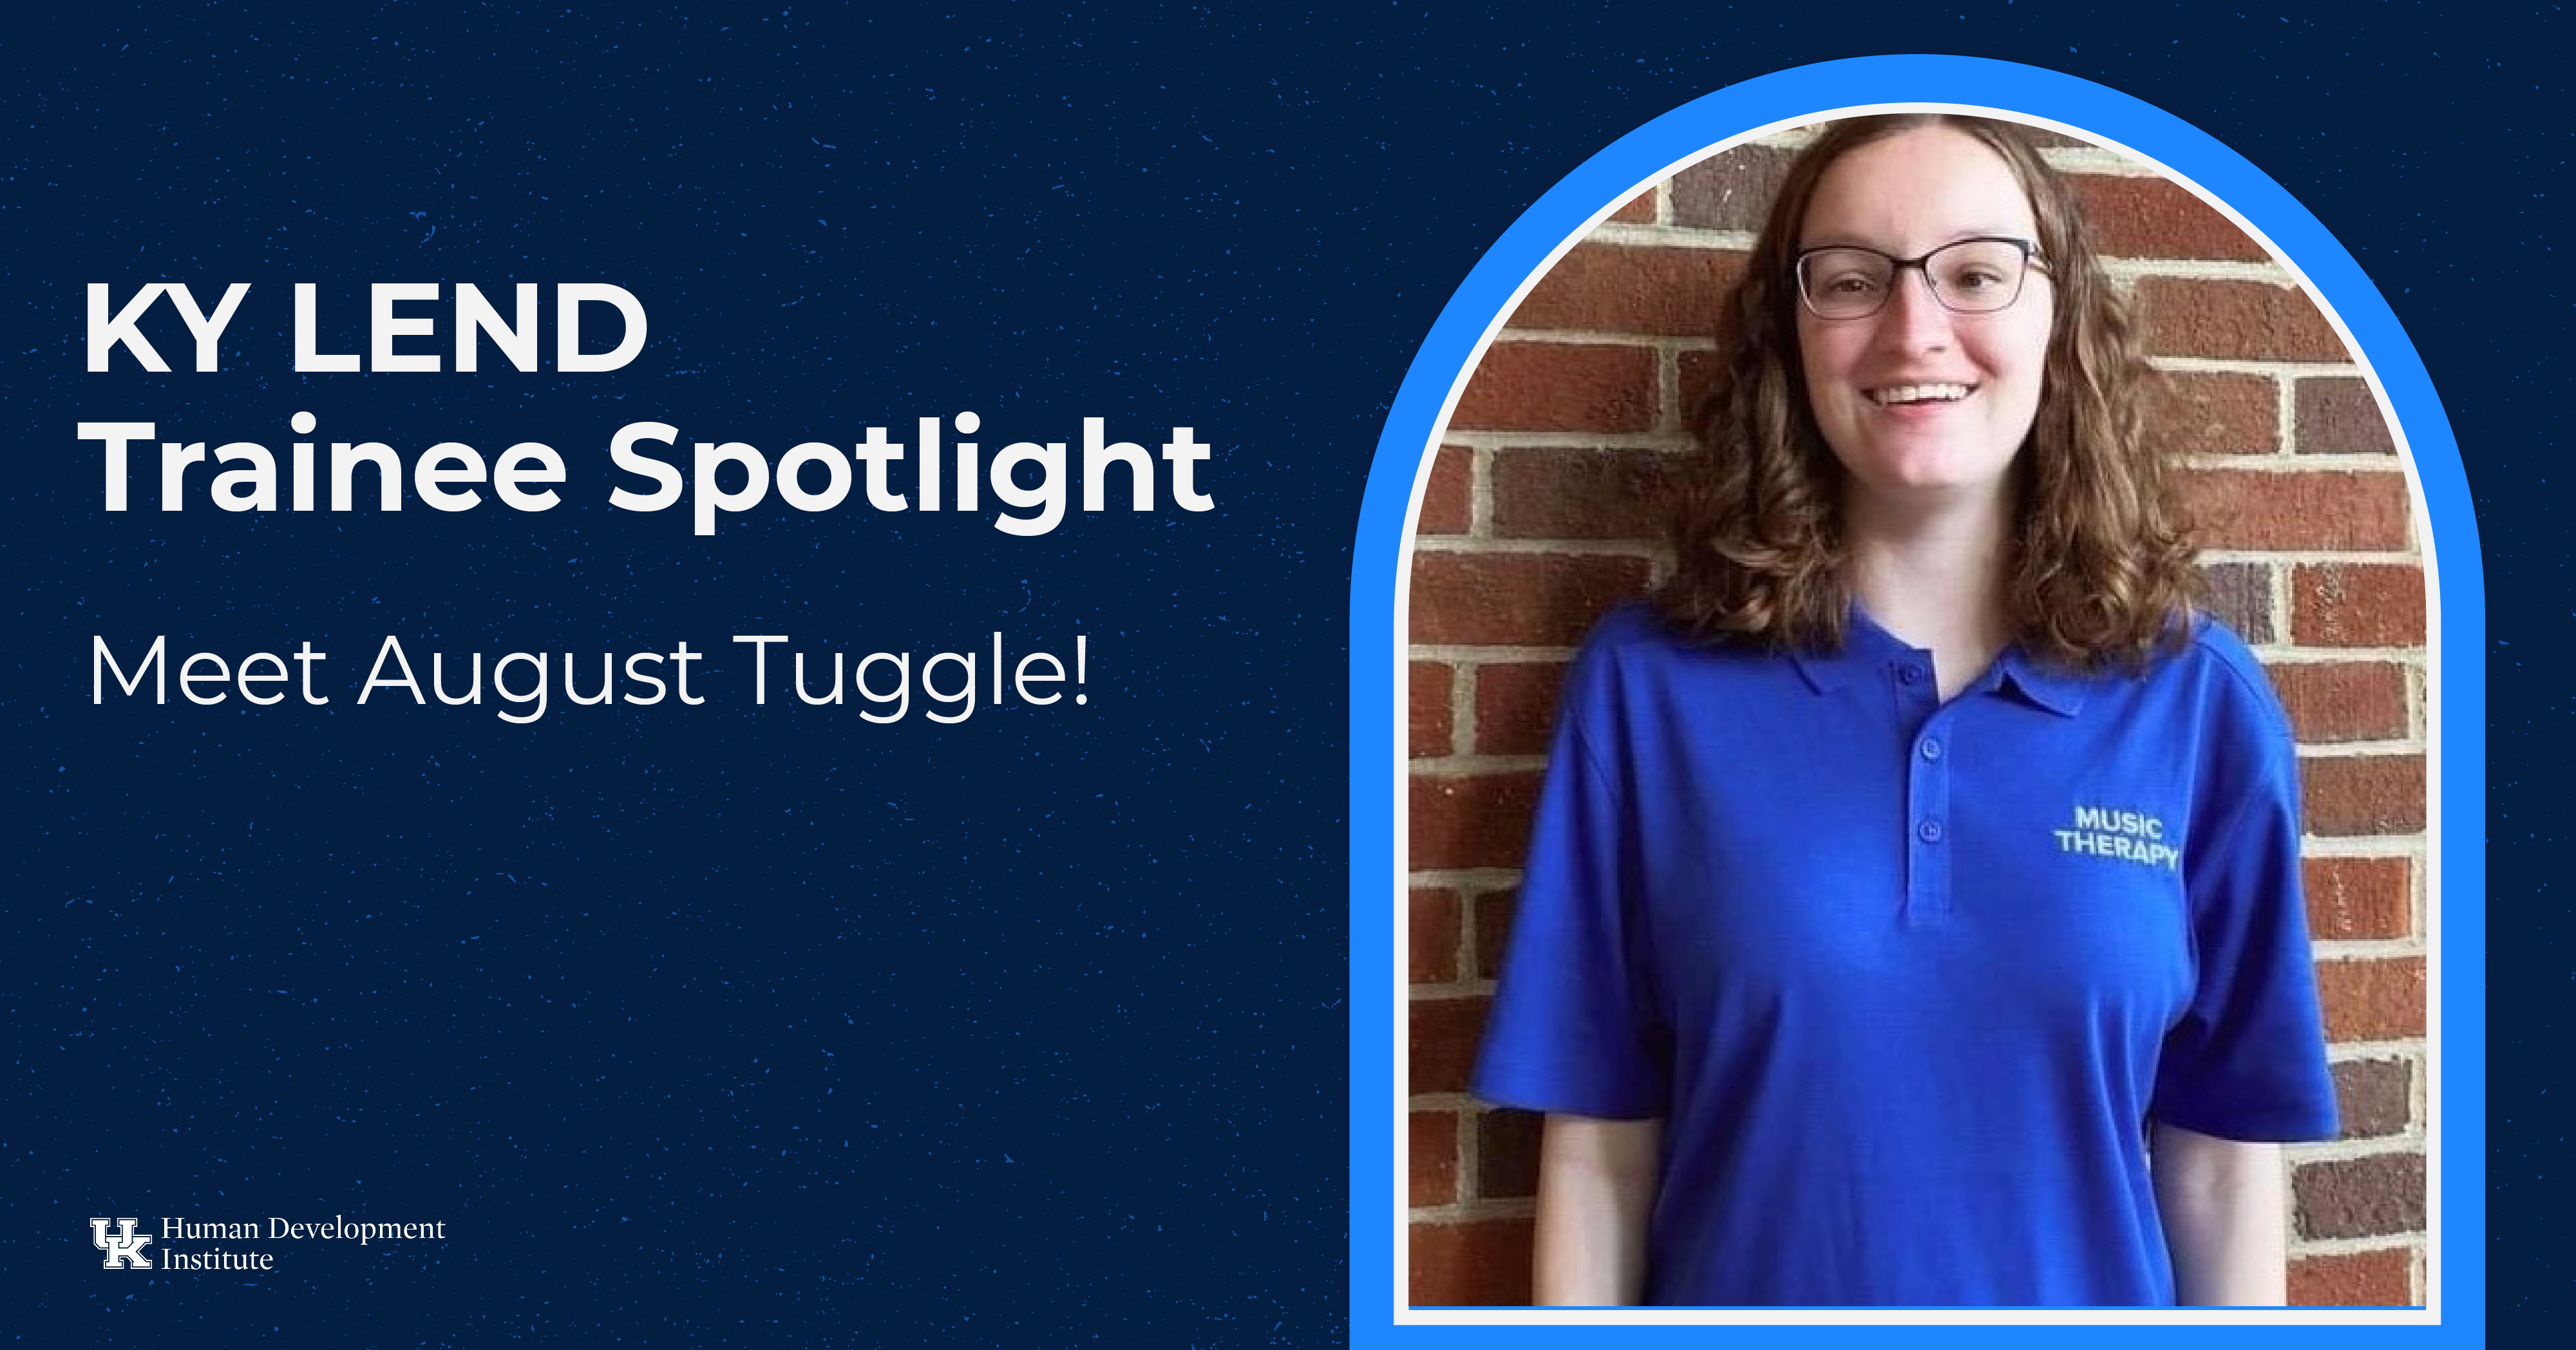 KY LEND Trainee Spotlight: Meet August Tuggle! August has shoulder-length curly hair and is wearing glasses and UK Blue polo with "Music Therapy" embroidered in white.